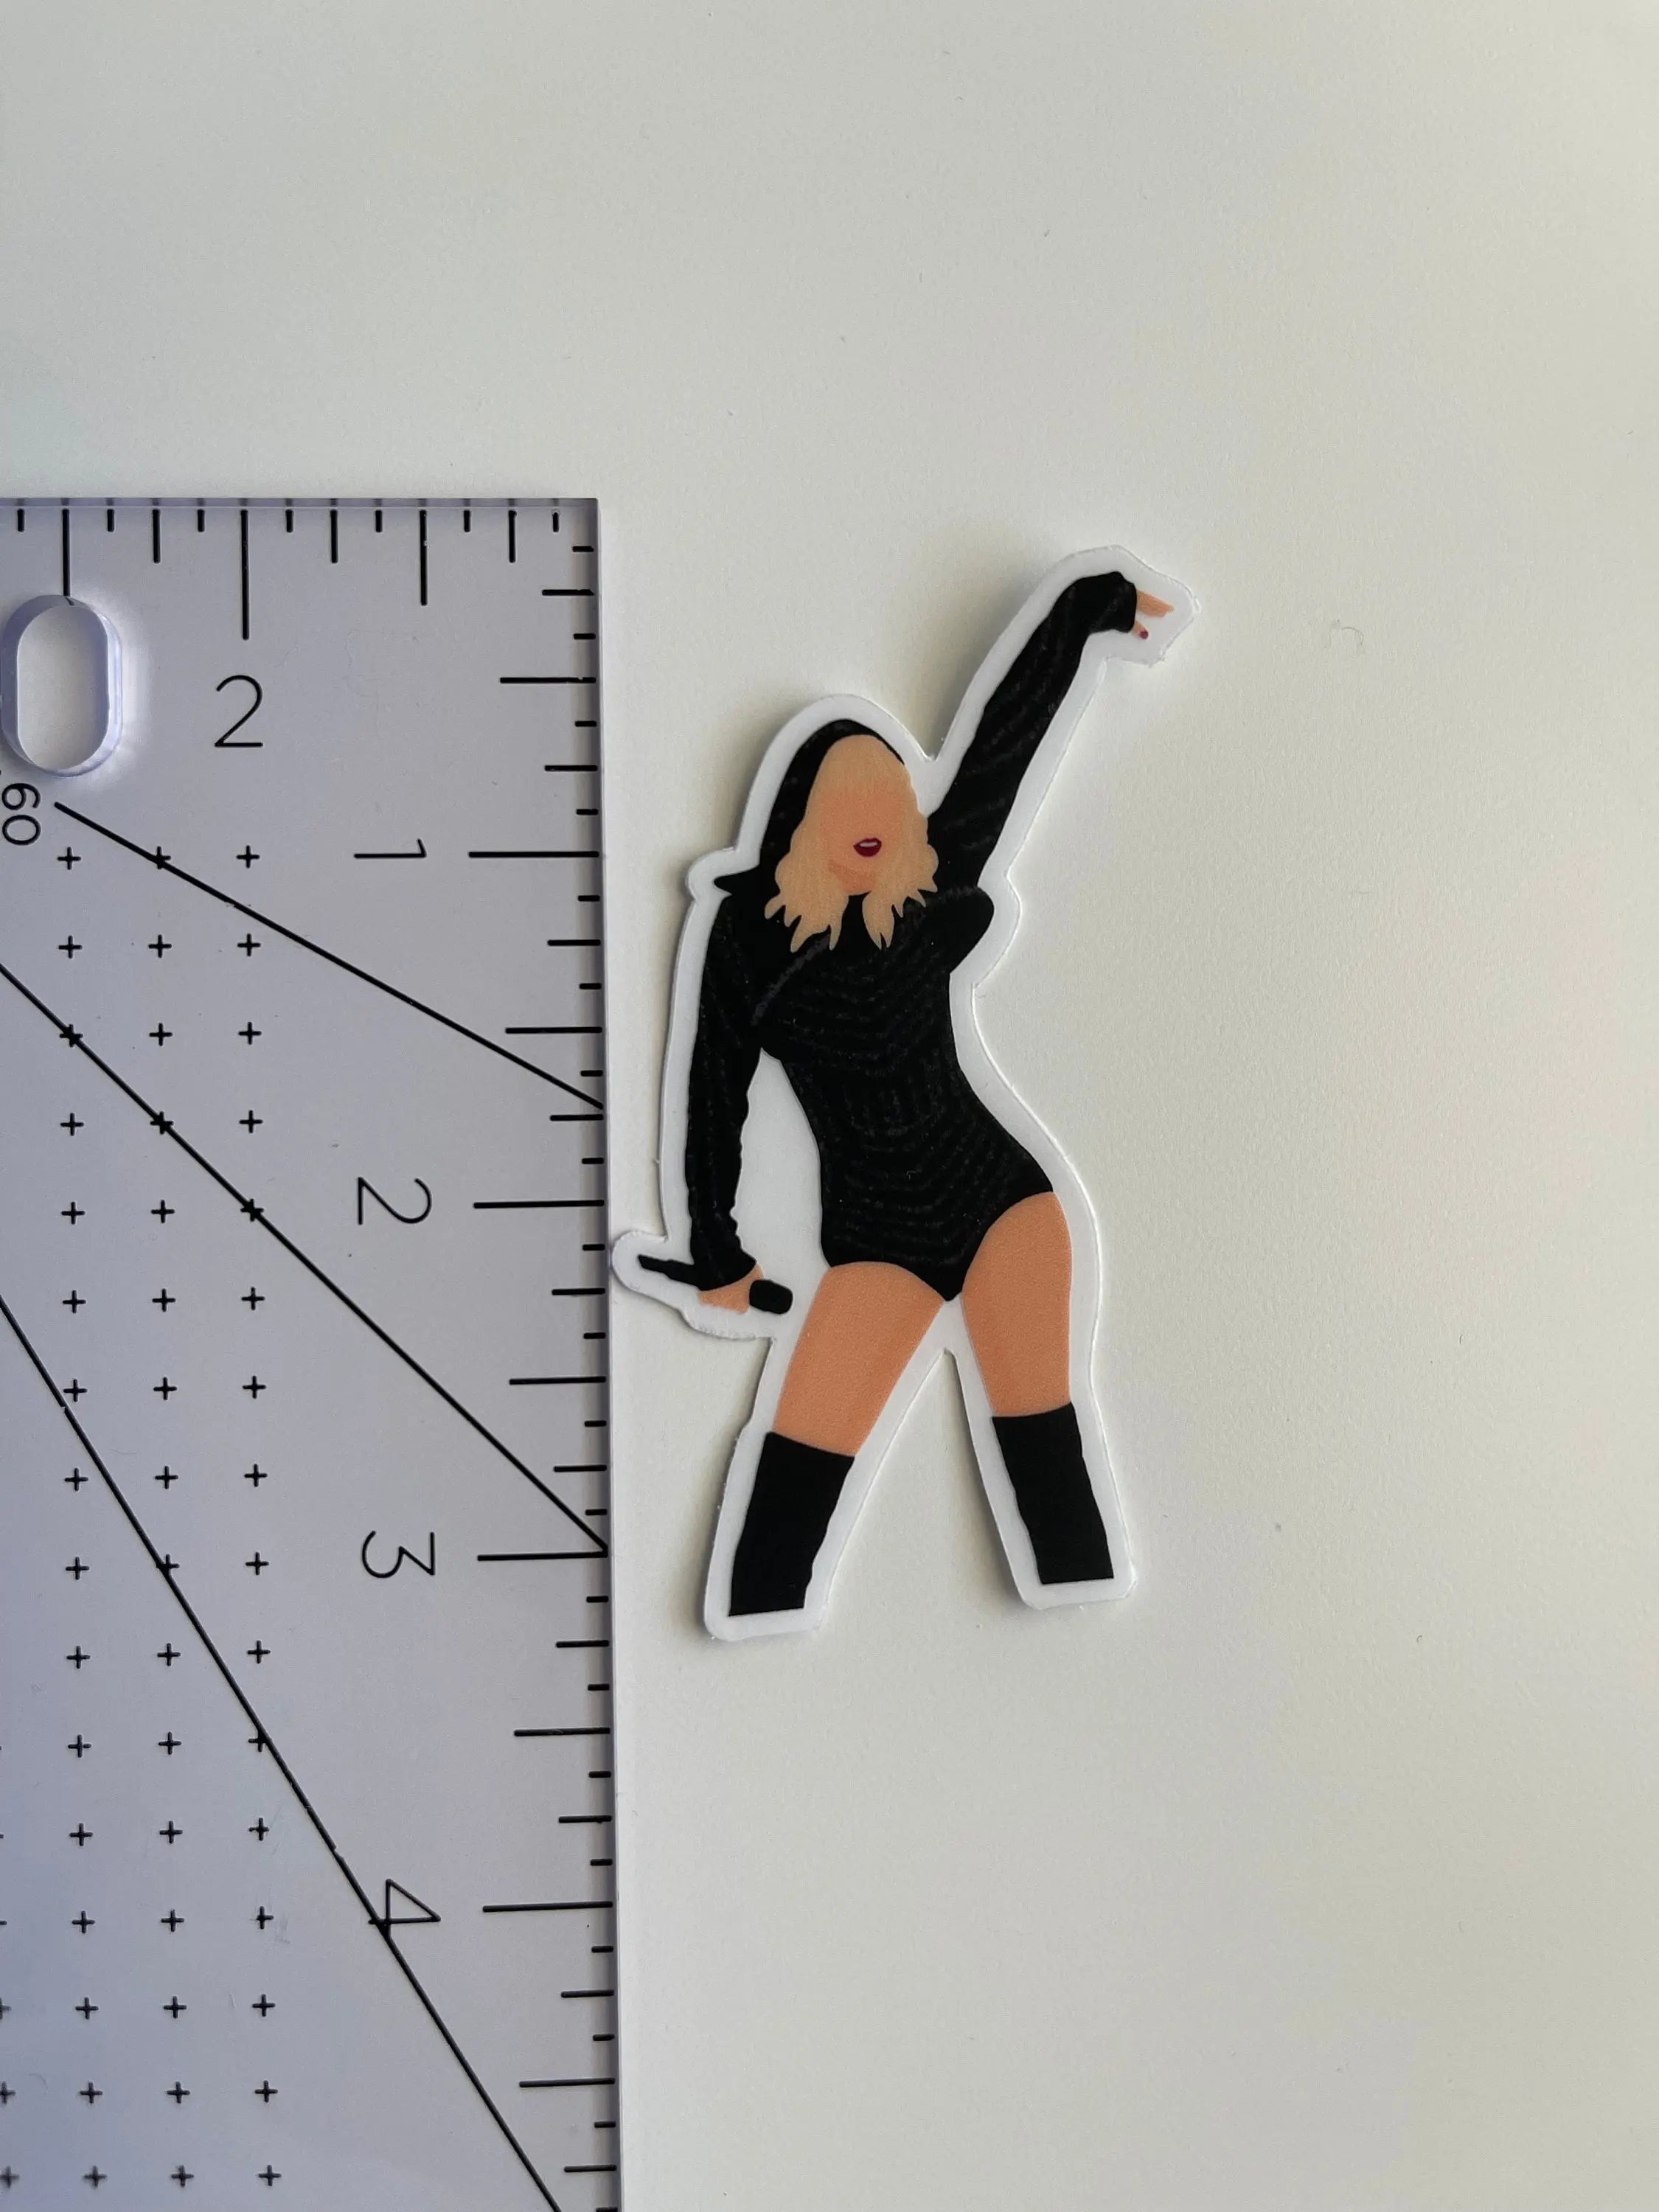 CLEAR Taylor Swift Reputation Tour sticker MangoIllustrated